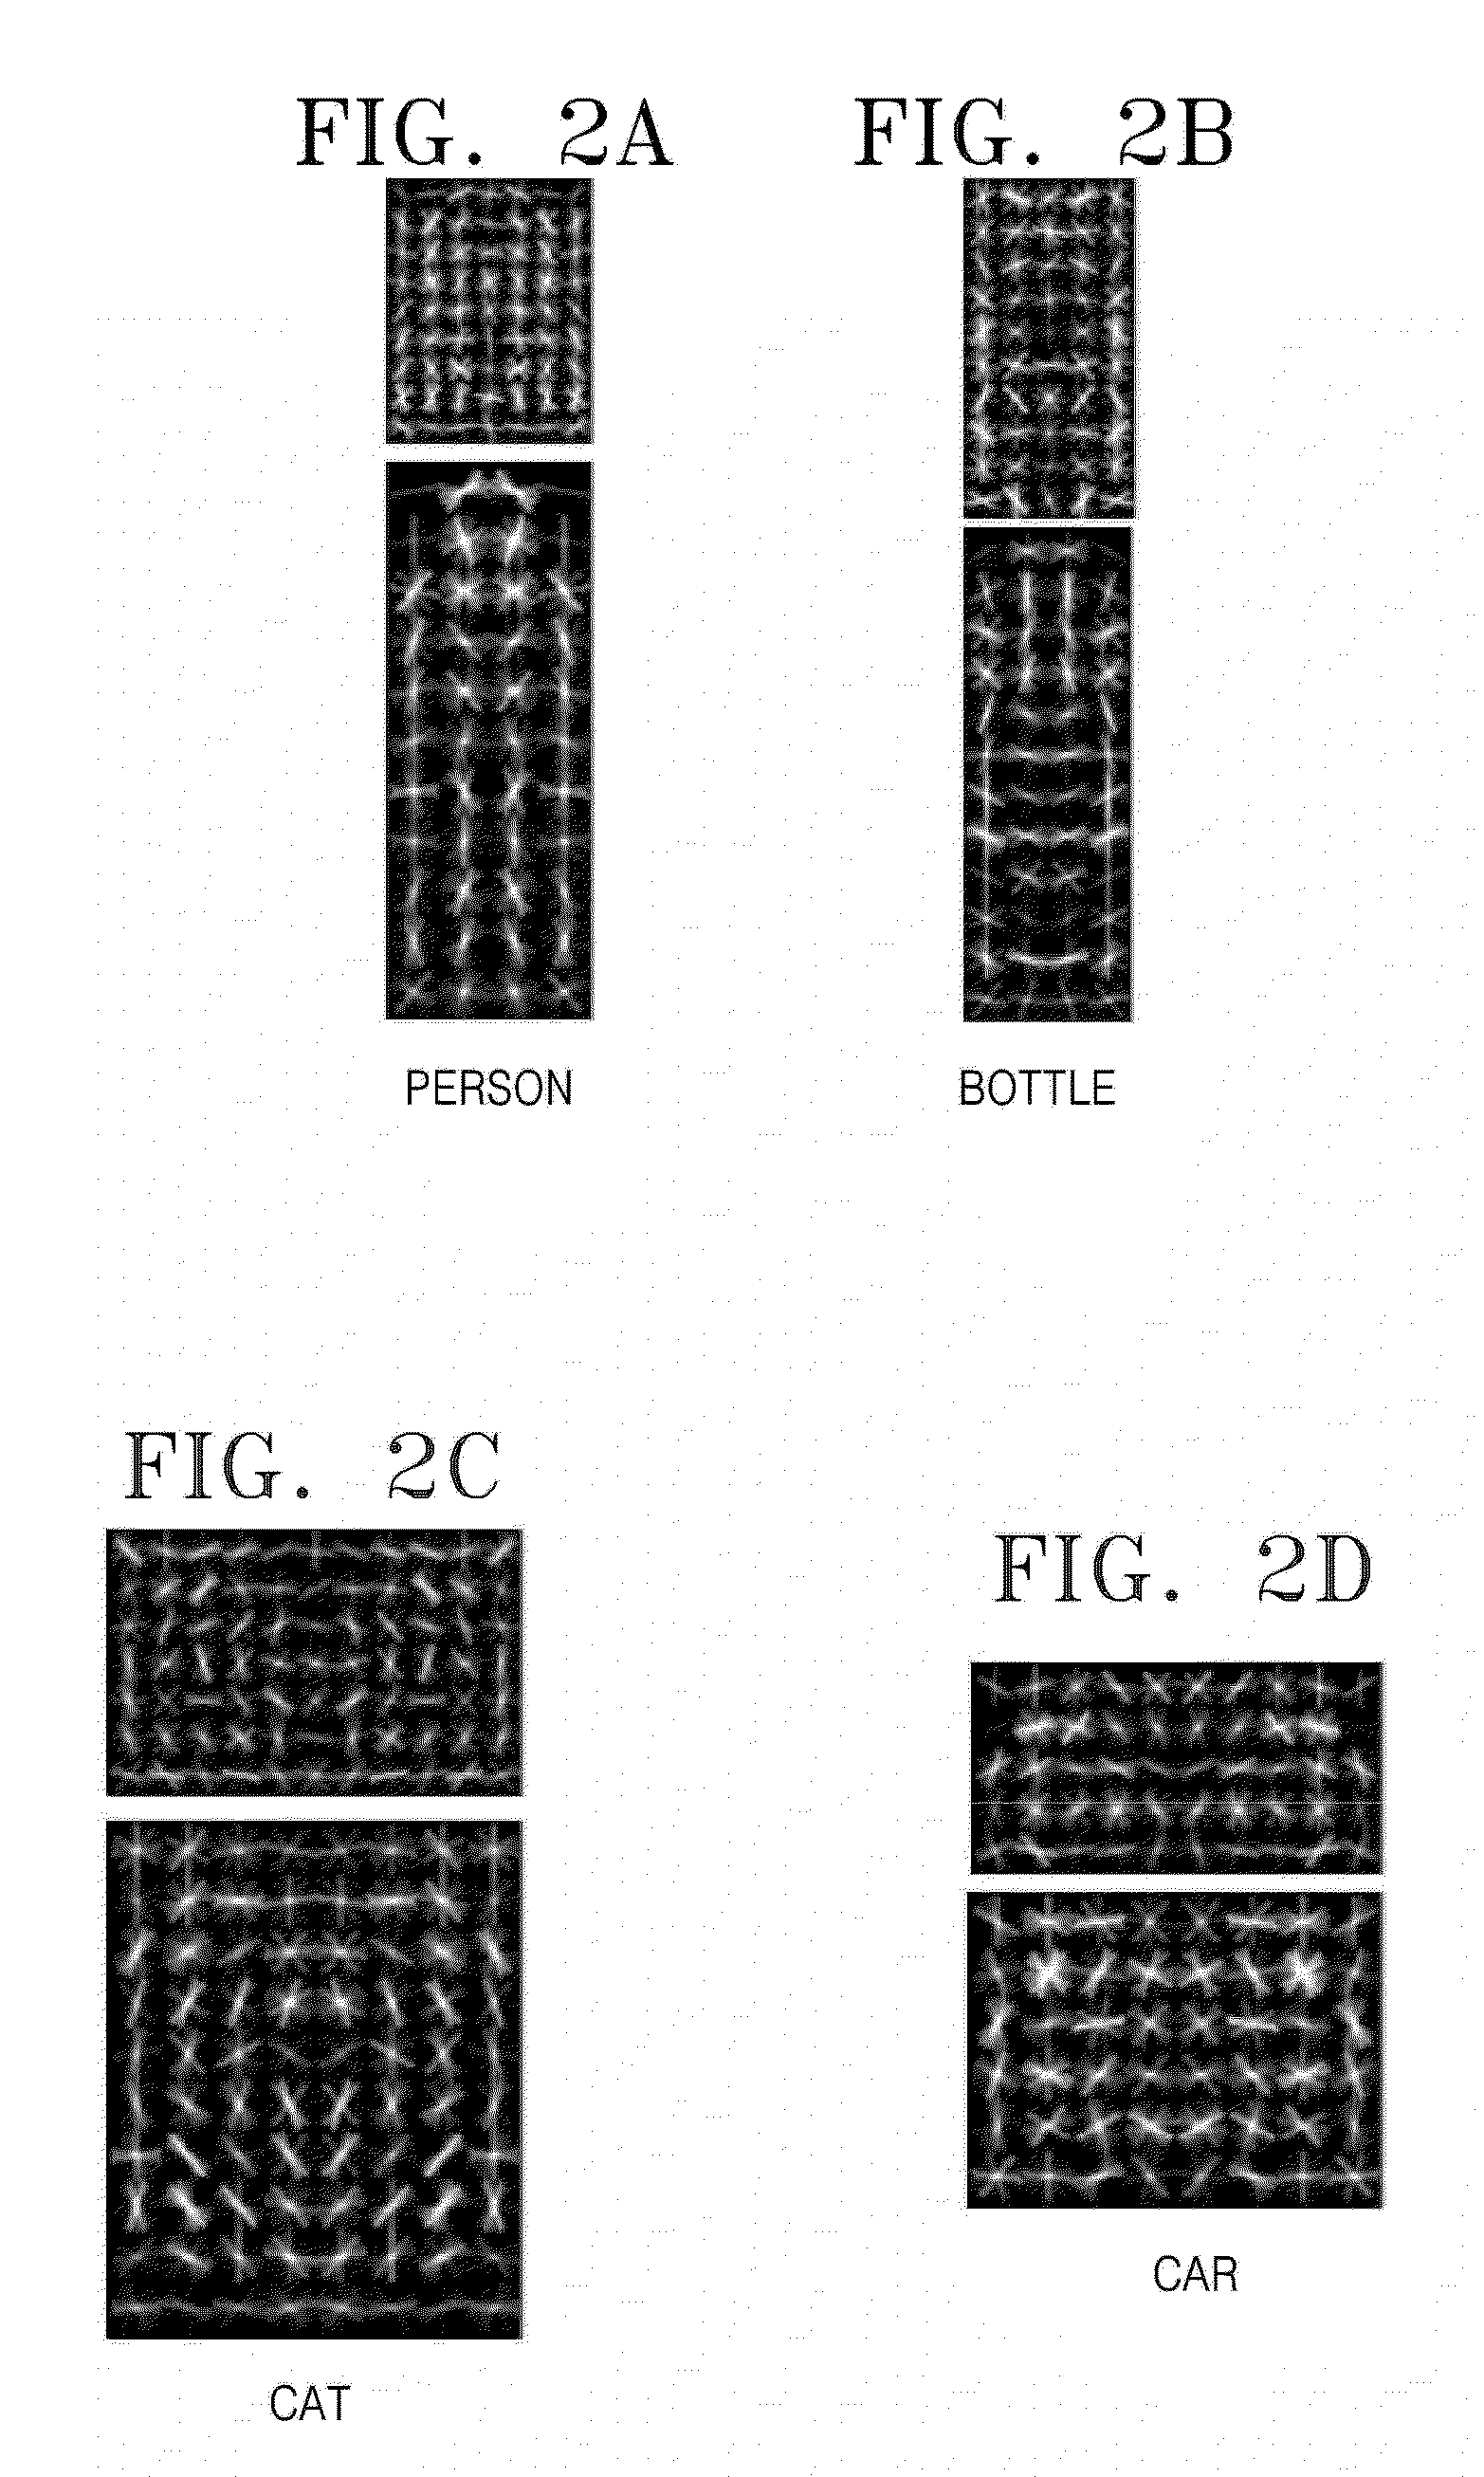 Apparatus and method for extracting object